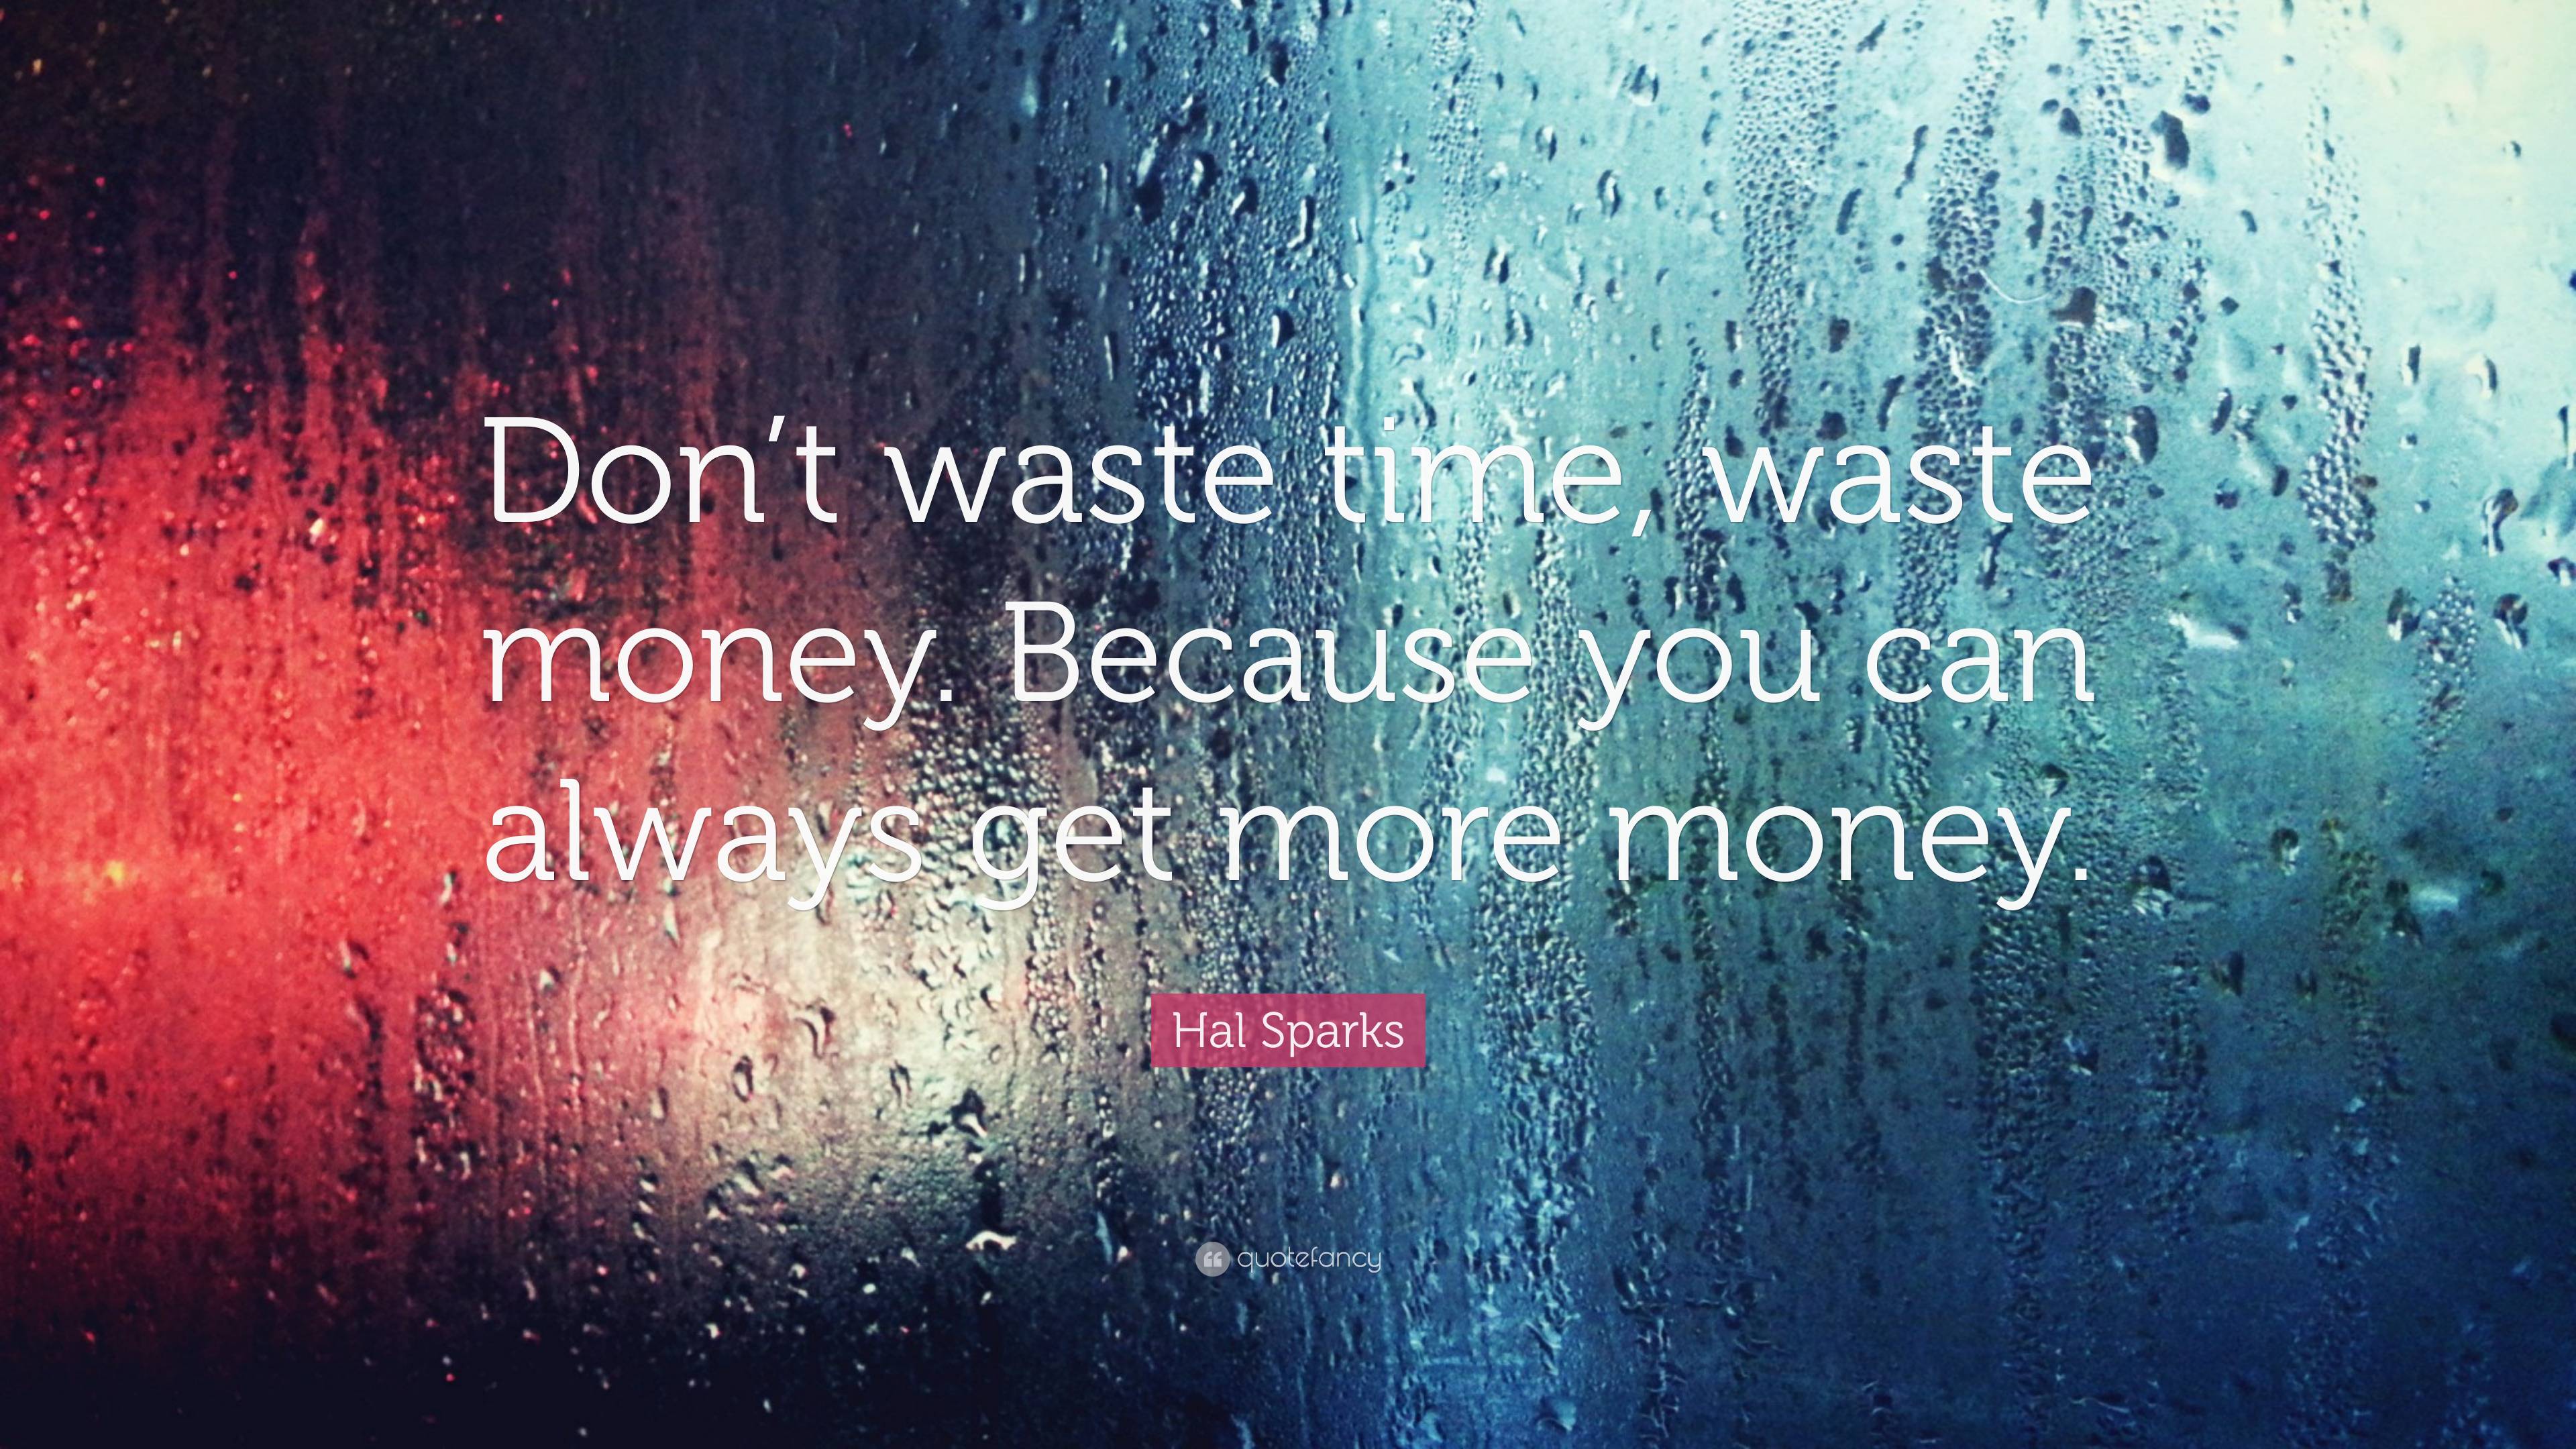 Hal Sparks Quote: “Don't waste time, waste money. Because you can always get more money.”